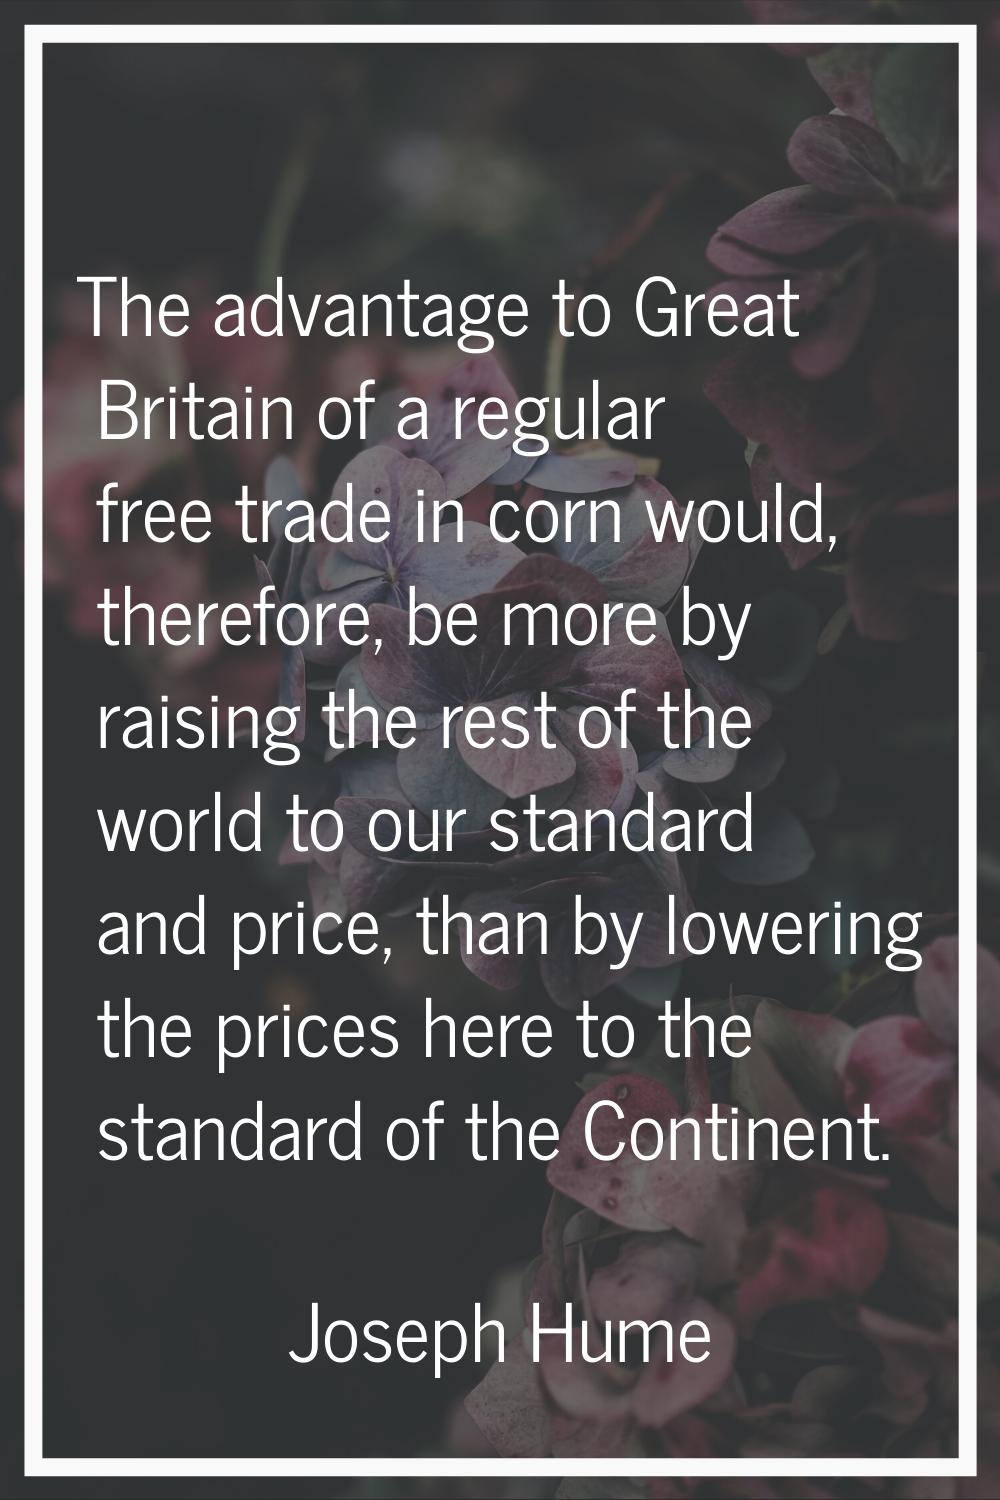 The advantage to Great Britain of a regular free trade in corn would, therefore, be more by raising